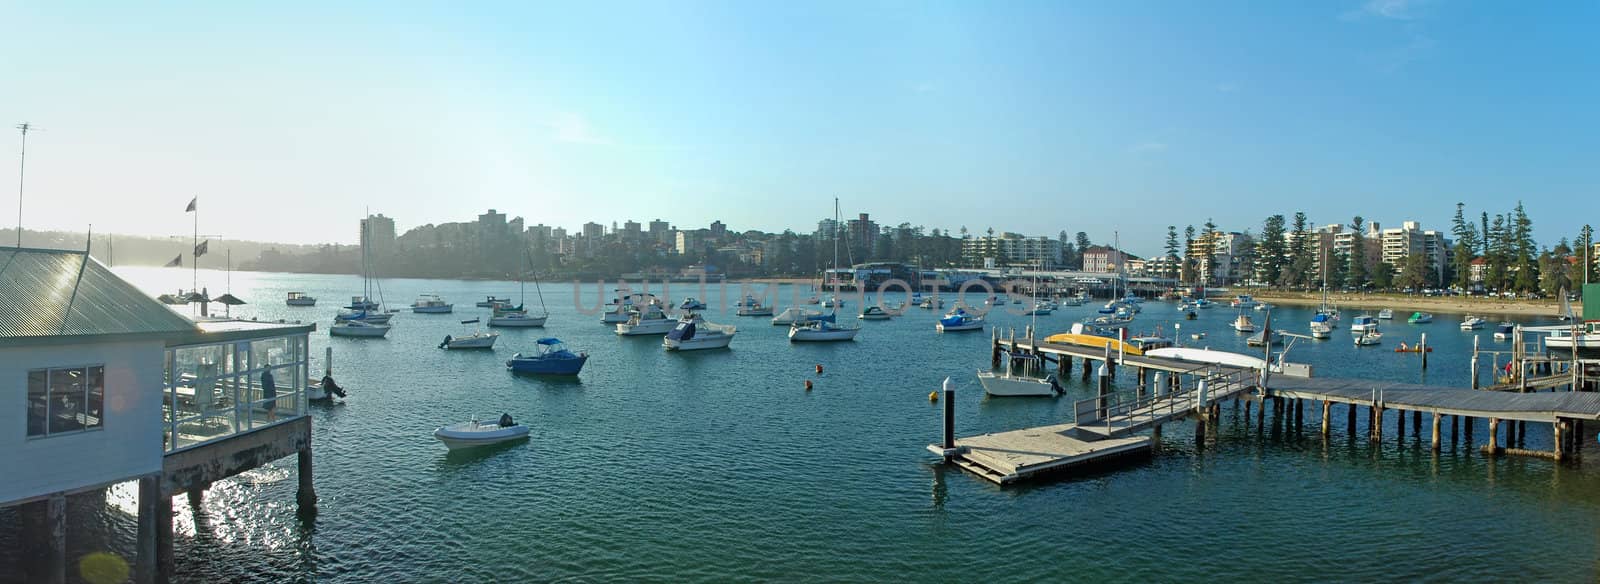 ships docking at Manly Harbour panorama photo, Sydney, Australia. Nice sunny day.